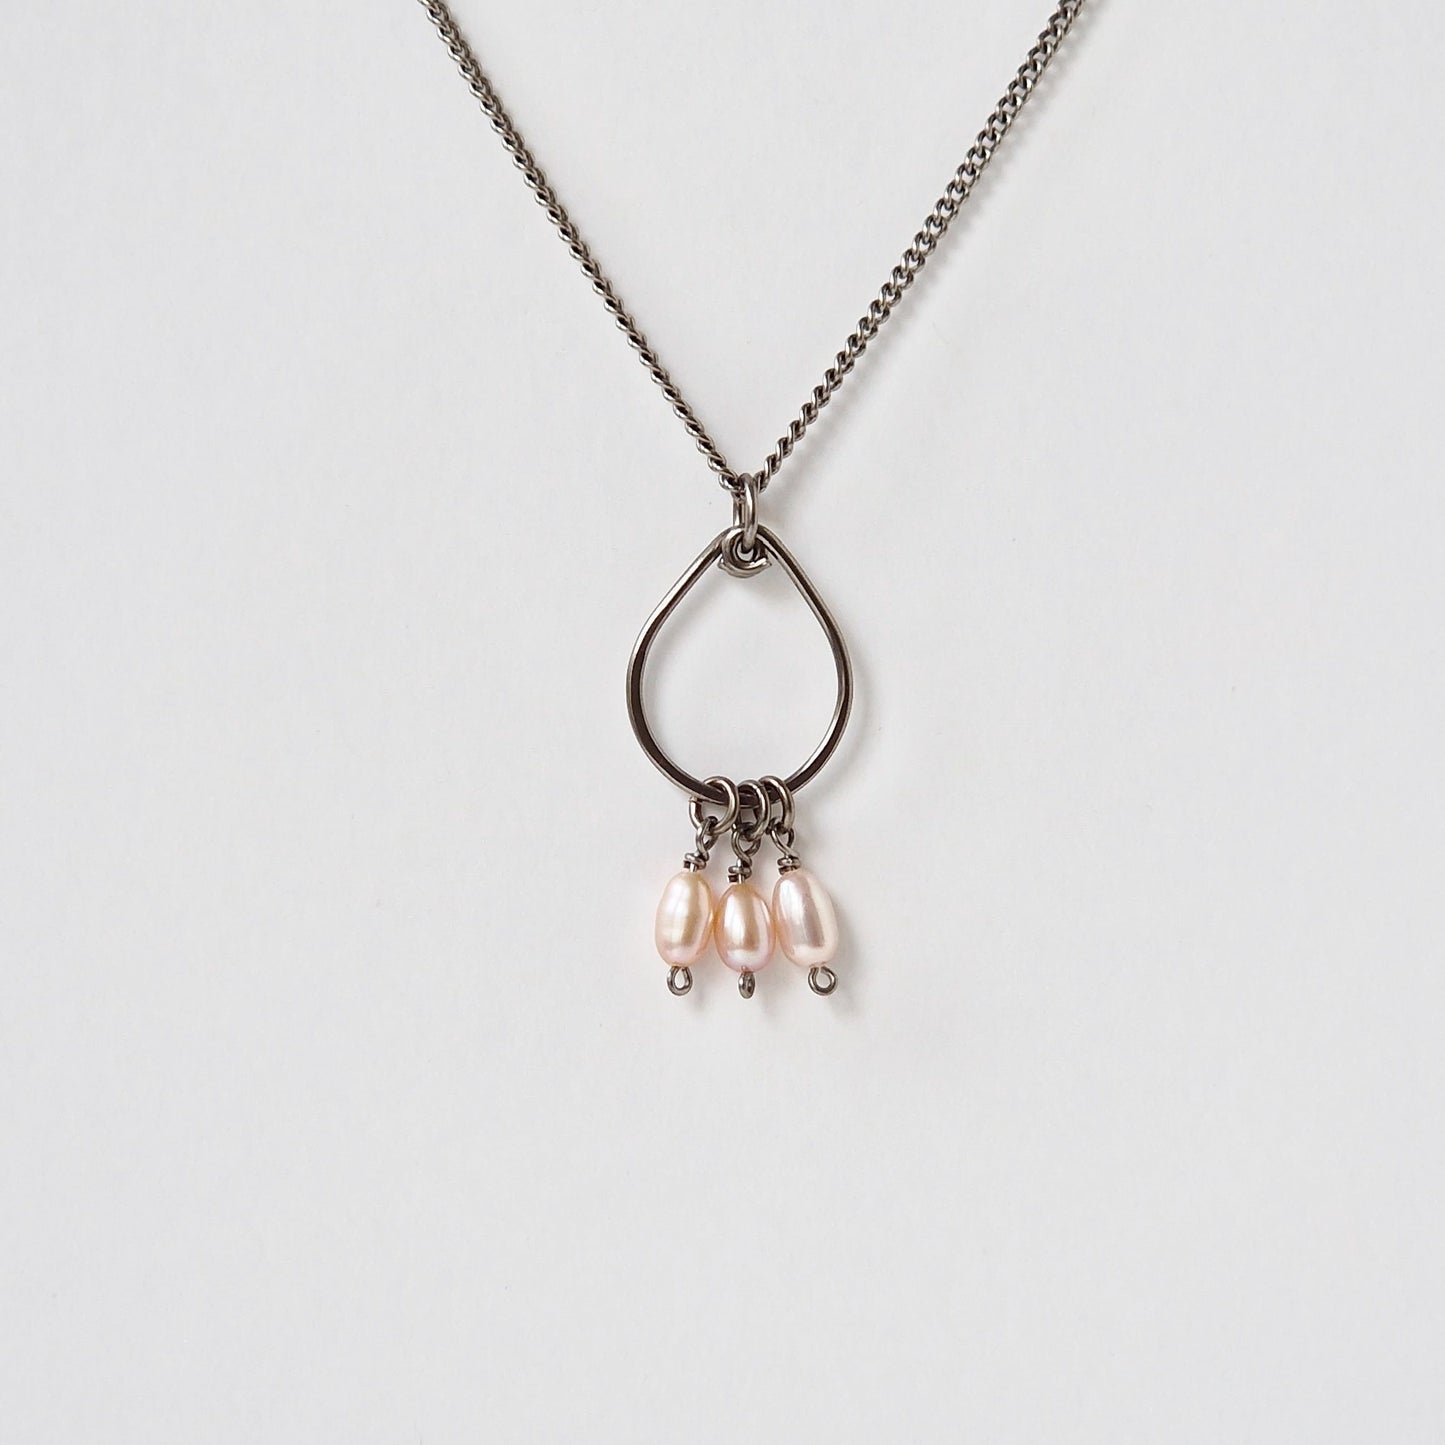 Titanium Teardrop Necklace with Pink Pearls